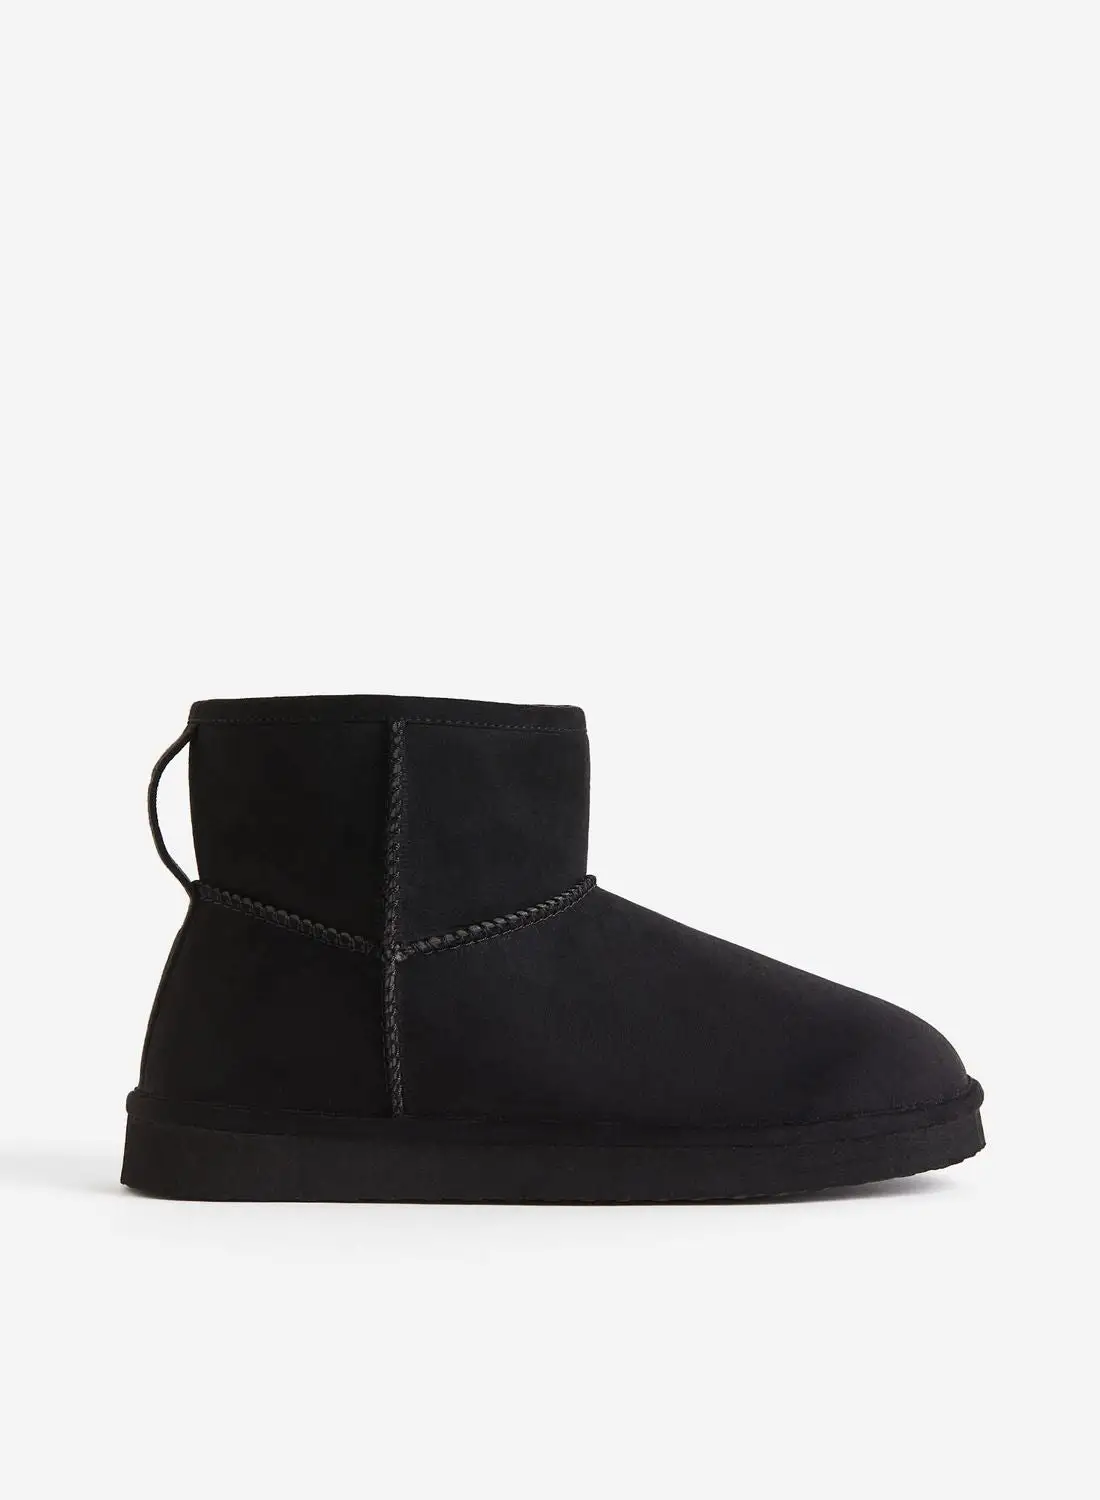 H&M Warm Lined Booties